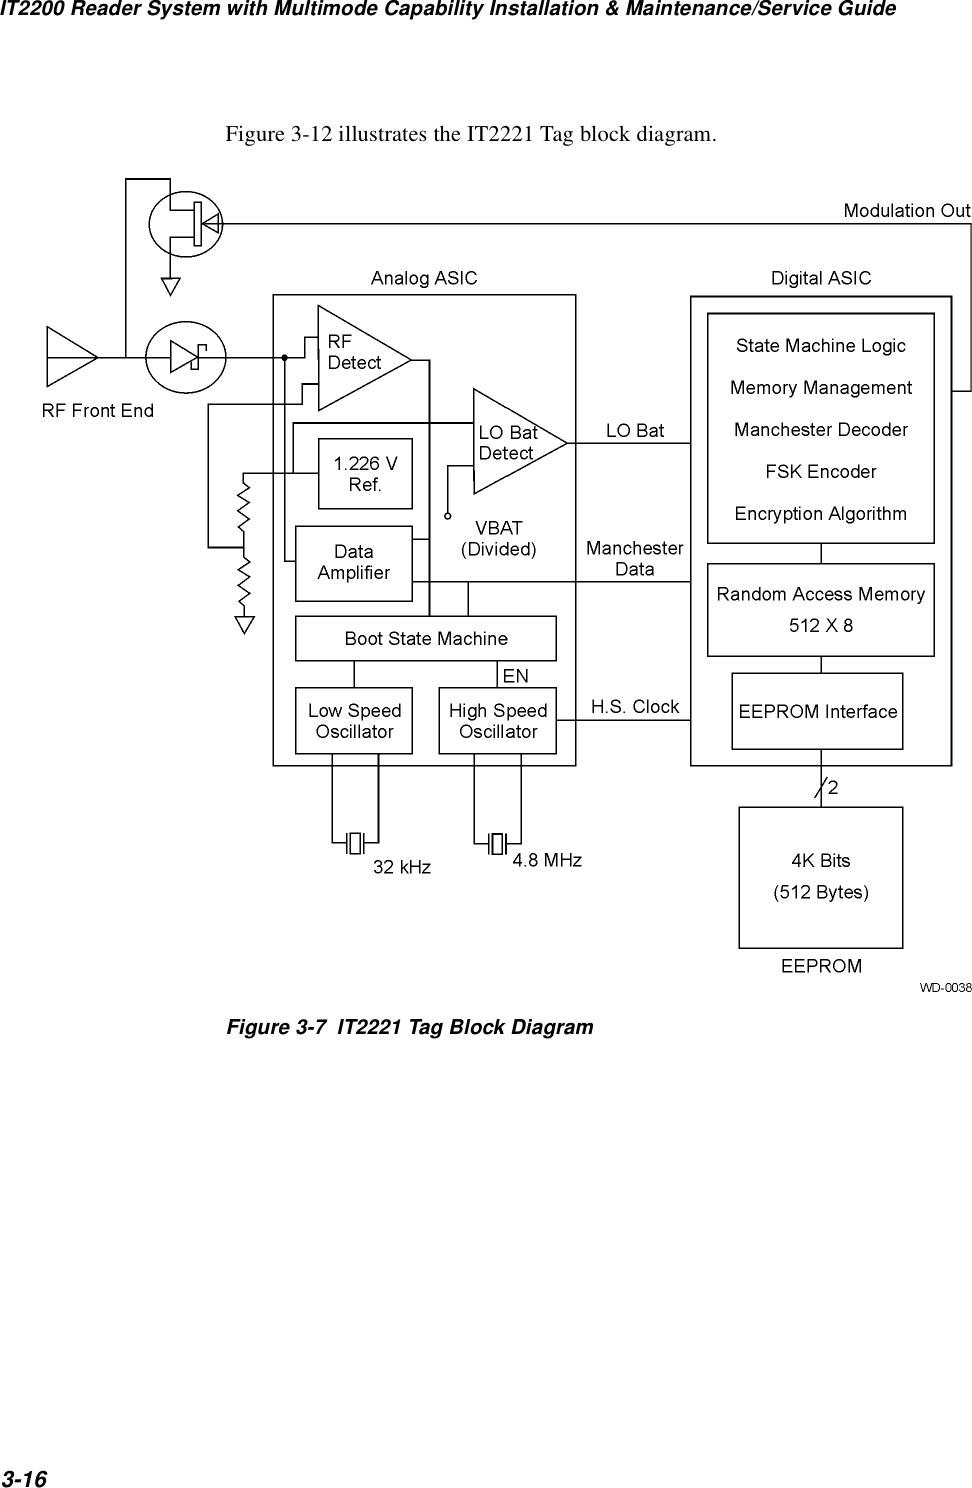 IT2200 Reader System with Multimode Capability Installation &amp; Maintenance/Service Guide3-16Figure 3-12 illustrates the IT2221 Tag block diagram.Figure 3-7  IT2221 Tag Block Diagram